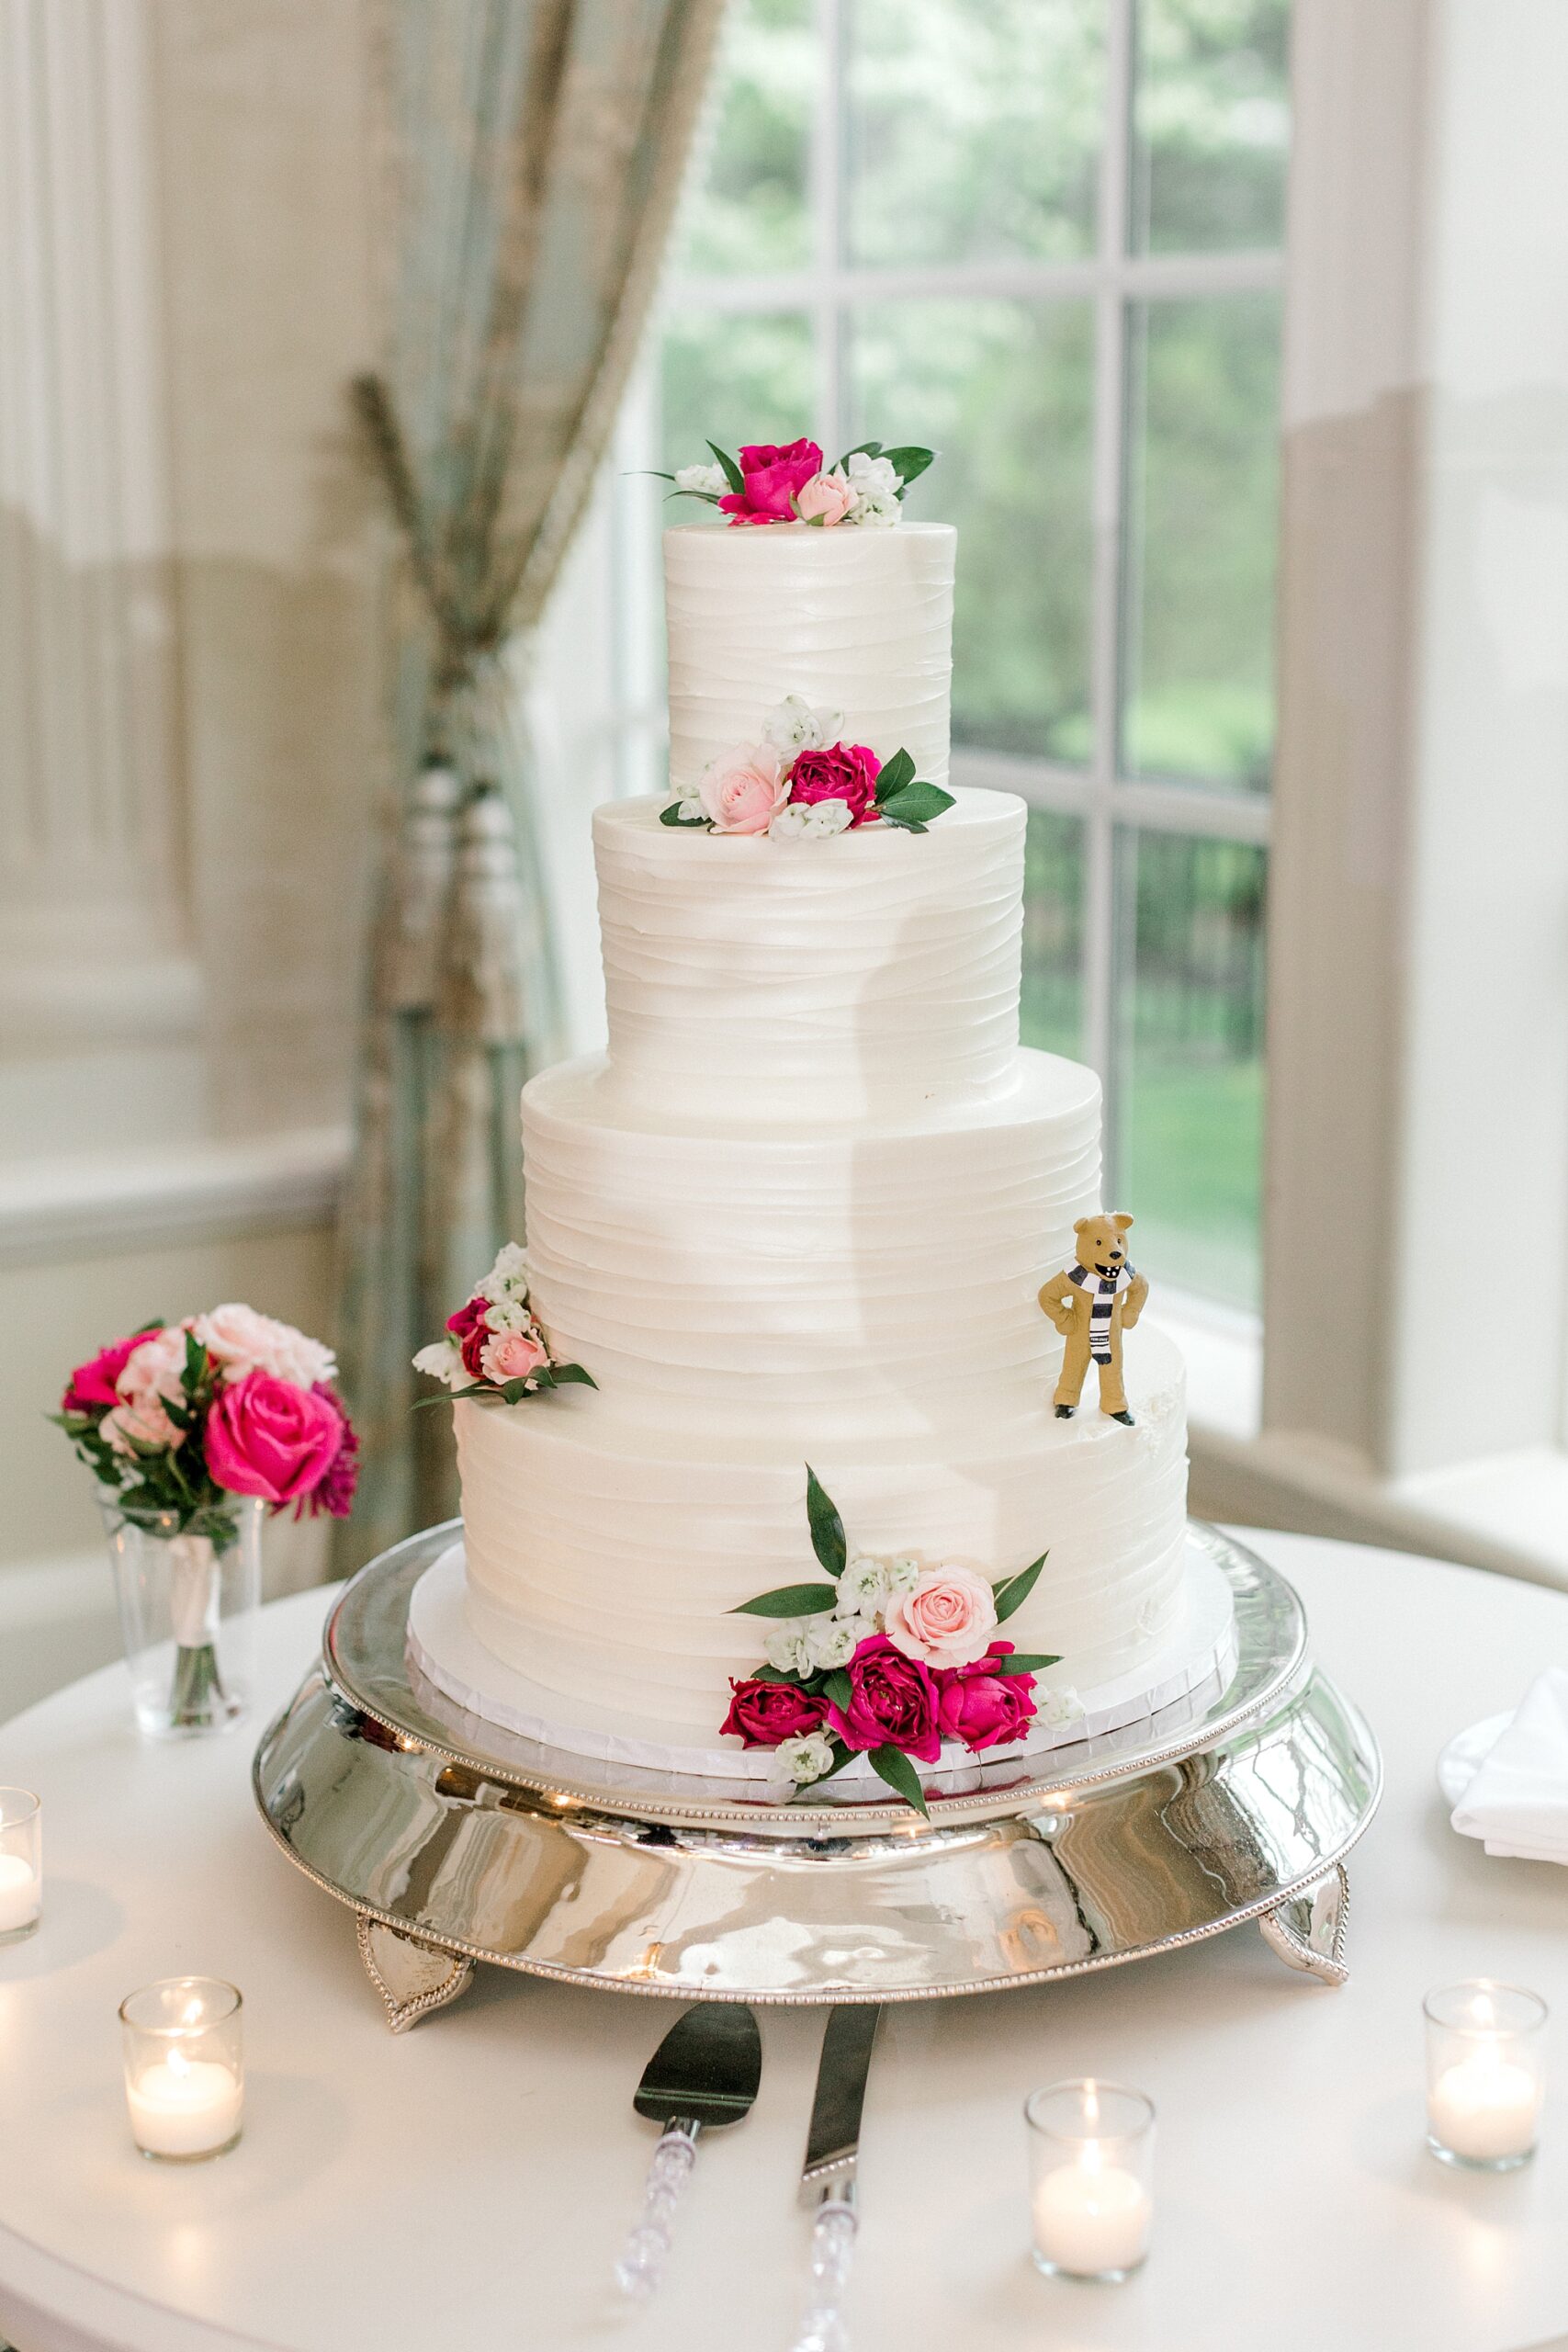 tiered wedding cake with rose accents and figurine